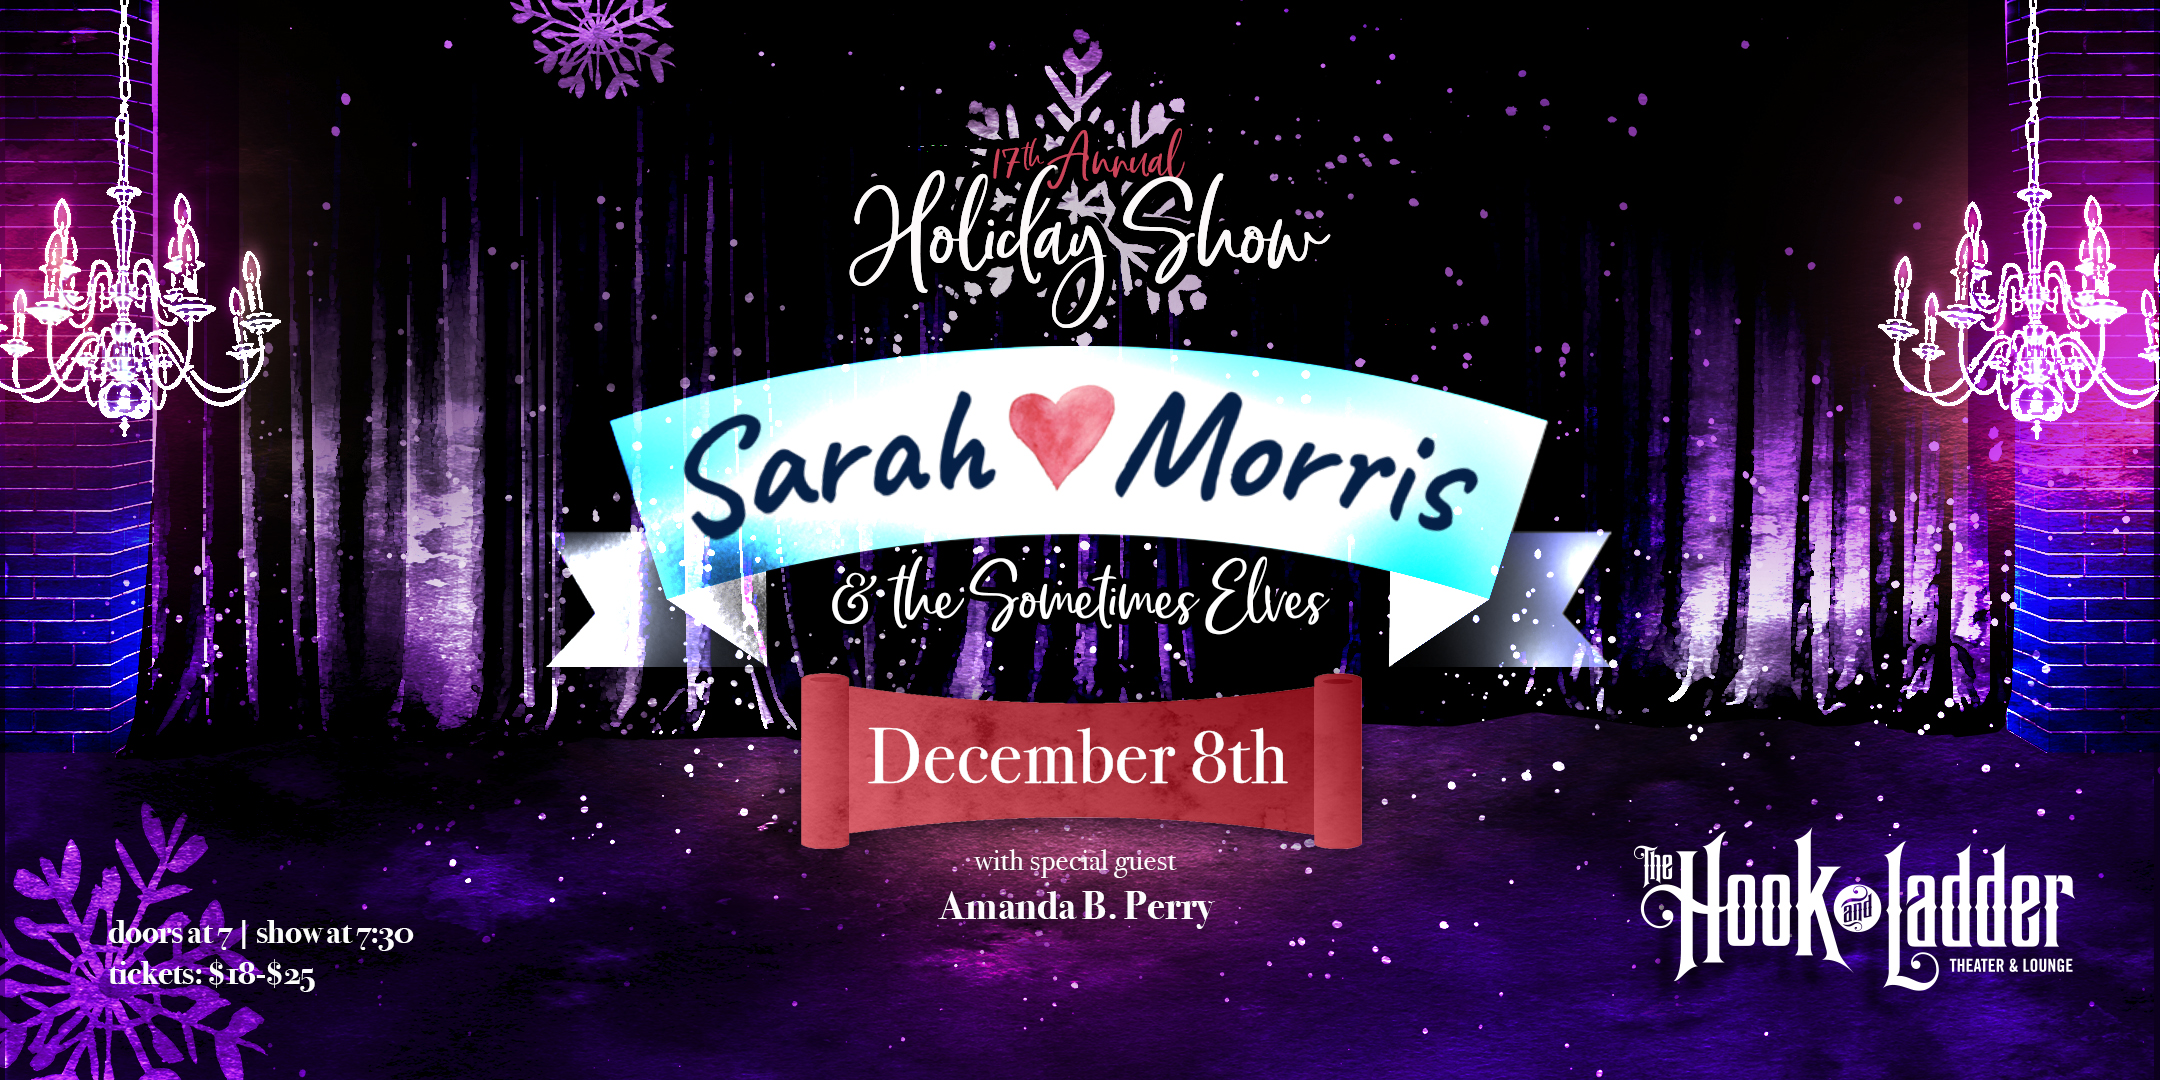 17th Annual Holiday Show Sarah Morris & The Sometimes Elves with guest Amanda B. Perry Friday, December 8 The Hook and Ladder Theater Doors 7:00pm :: Music 7:30pm :: 21+ (Under 21 with Parent or Guardian) Reserved Seat: $25 Standing Room Only: $18 ADV / $25 DOS